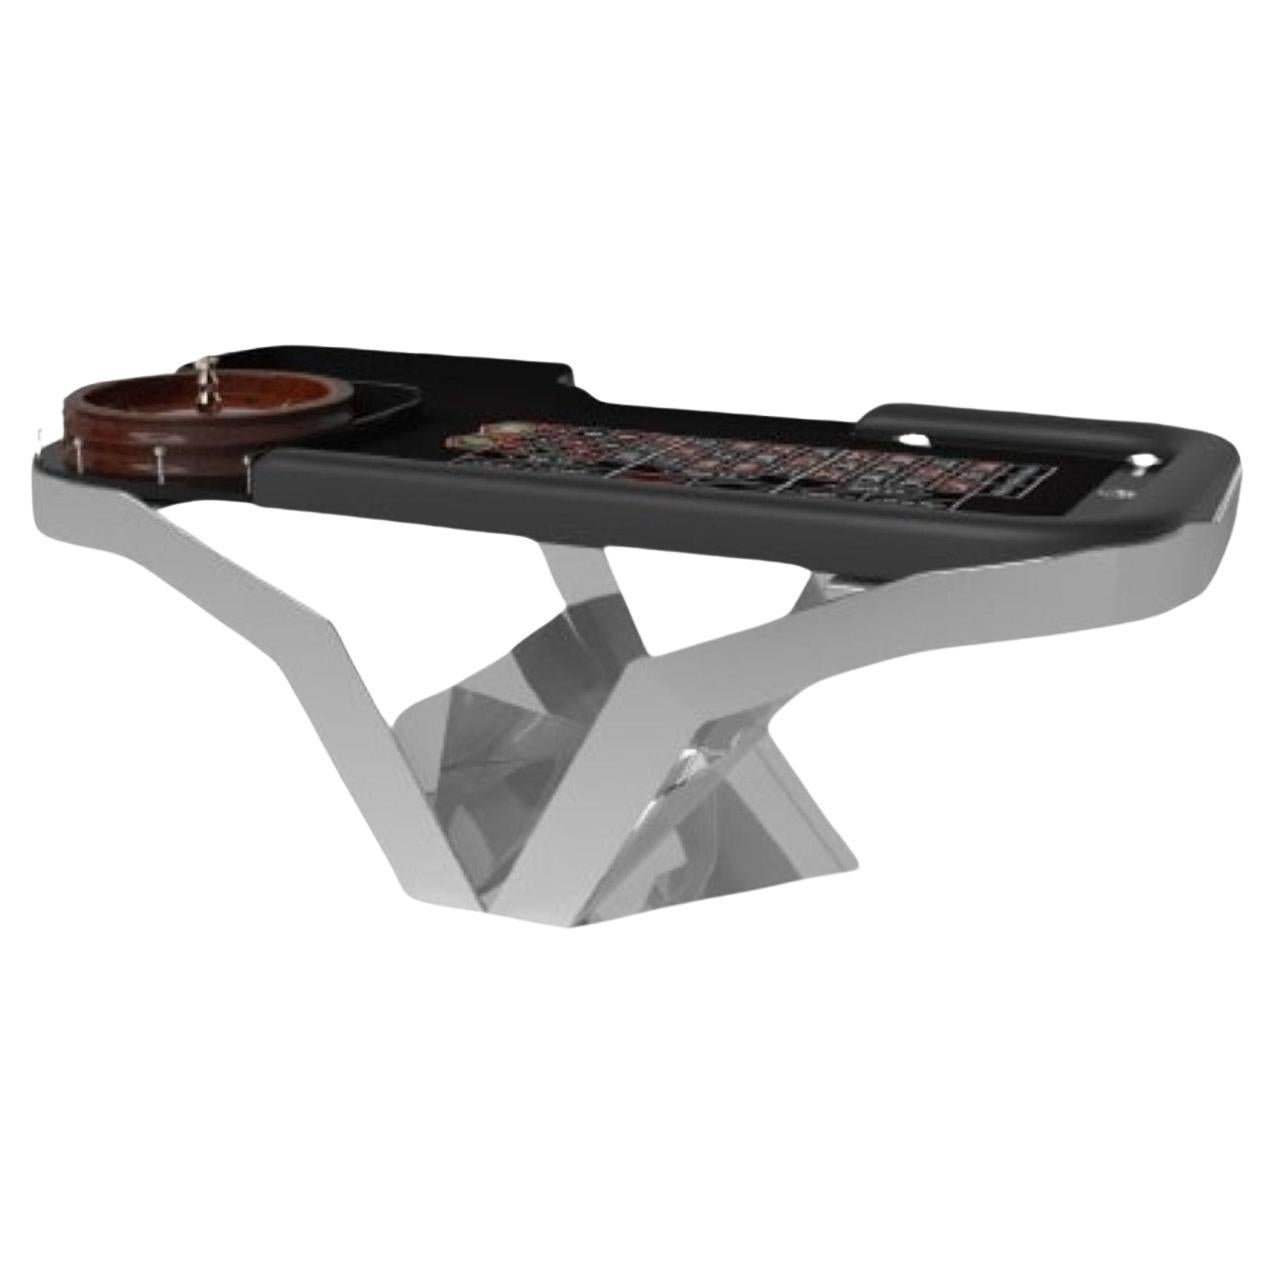 Elevate Customs Enzo Roulette Tables / Stainless Steel Sheet Metal in 8'2" - USA